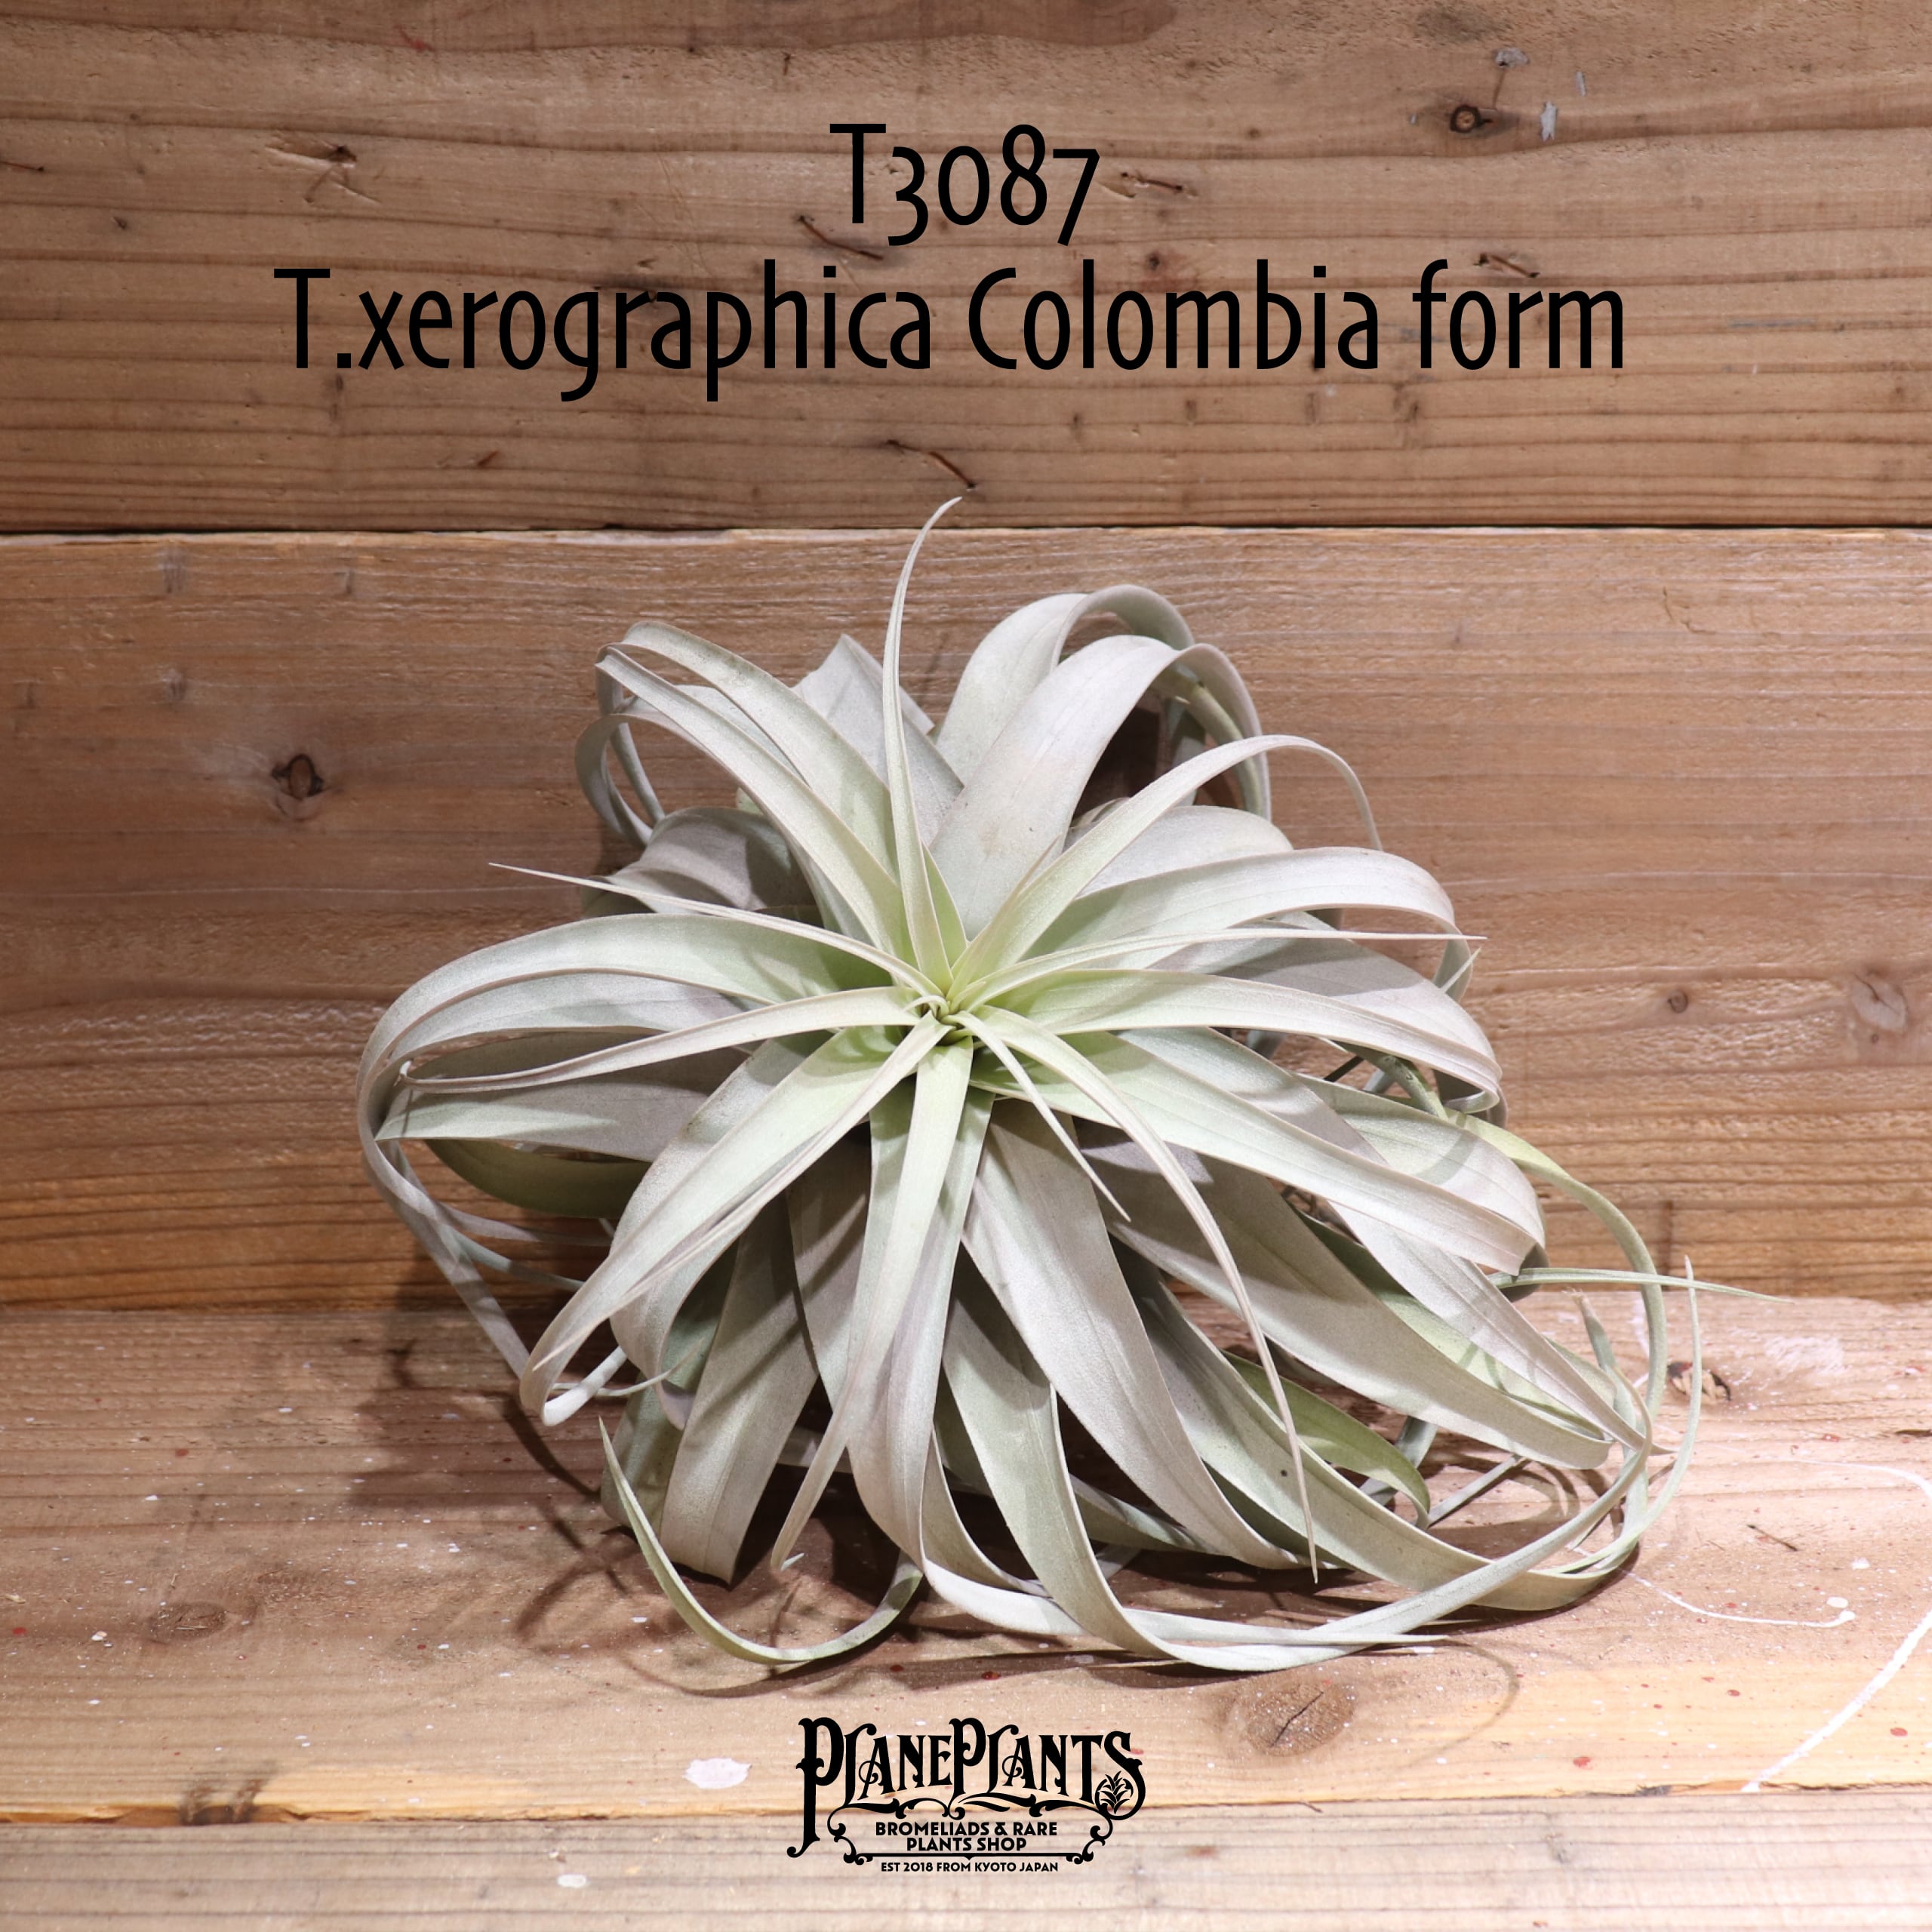 xerographica Colombia form (花芽付き) T3087